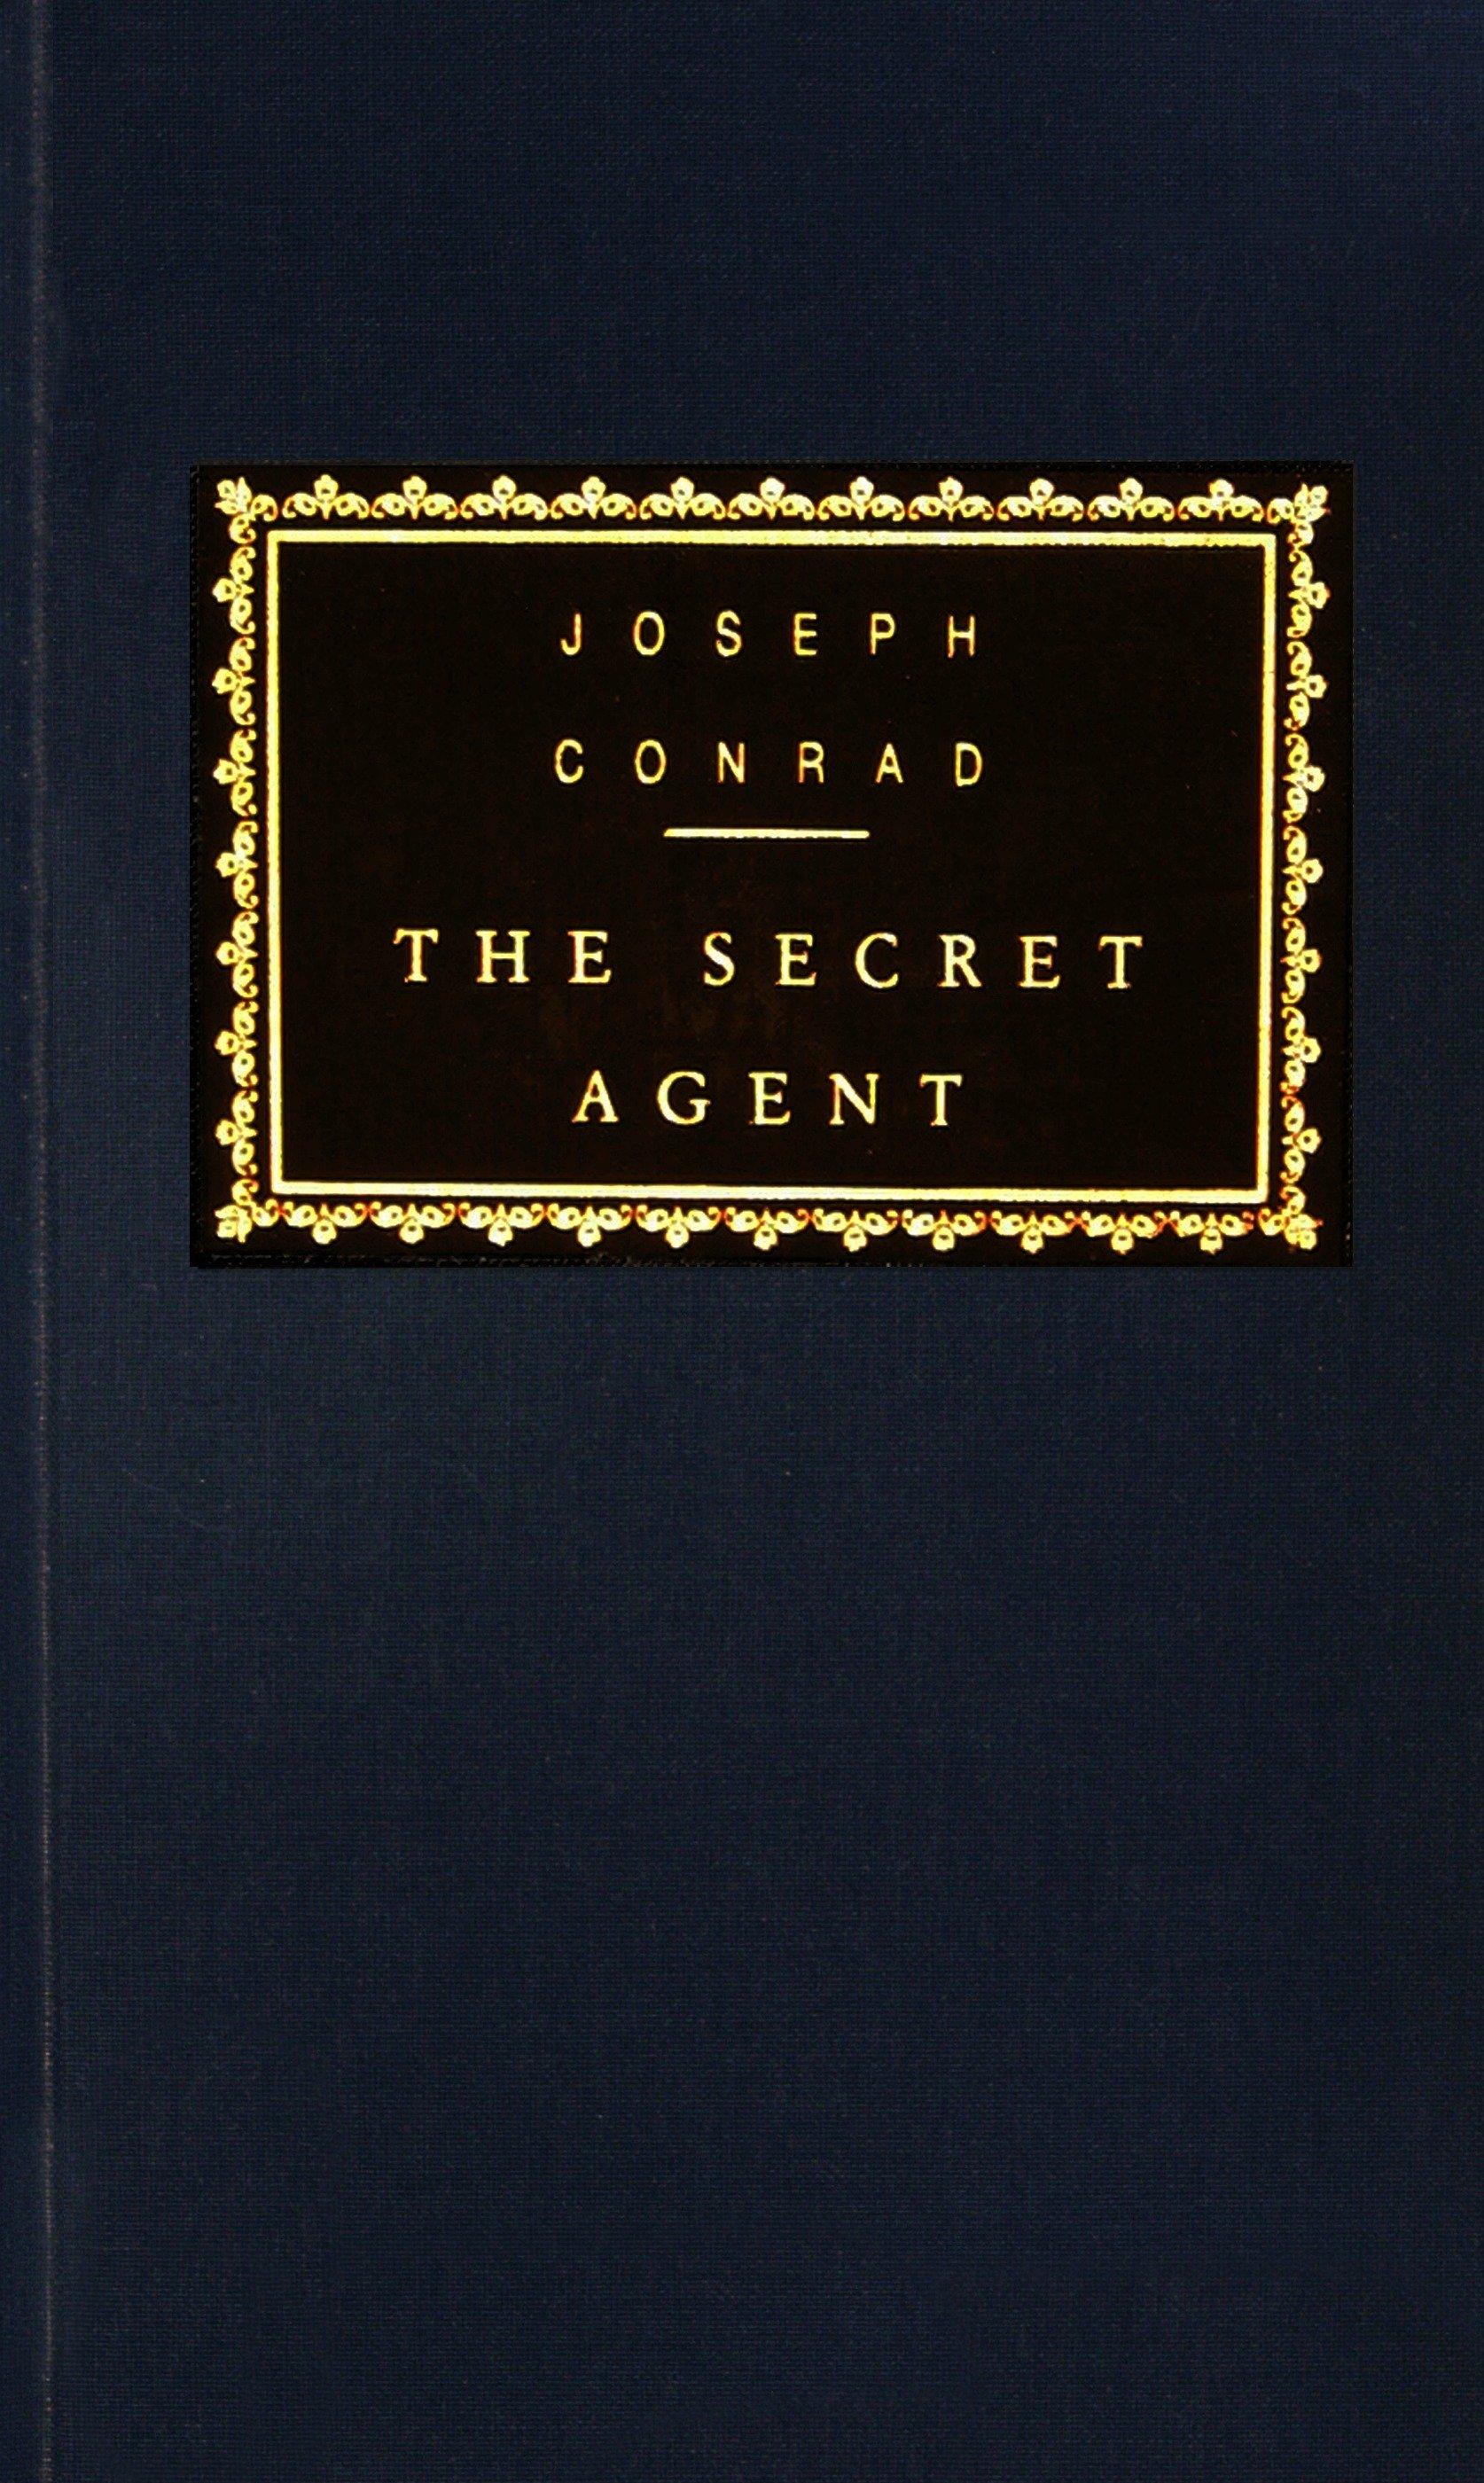 The Secret Agent: Introduction by Paul Theroux / Joseph Conrad / Buch / Everyman's Library Classics / Englisch / 1992 / Knopf Doubleday Publishing Group / EAN 9780679417231 - Conrad, Joseph